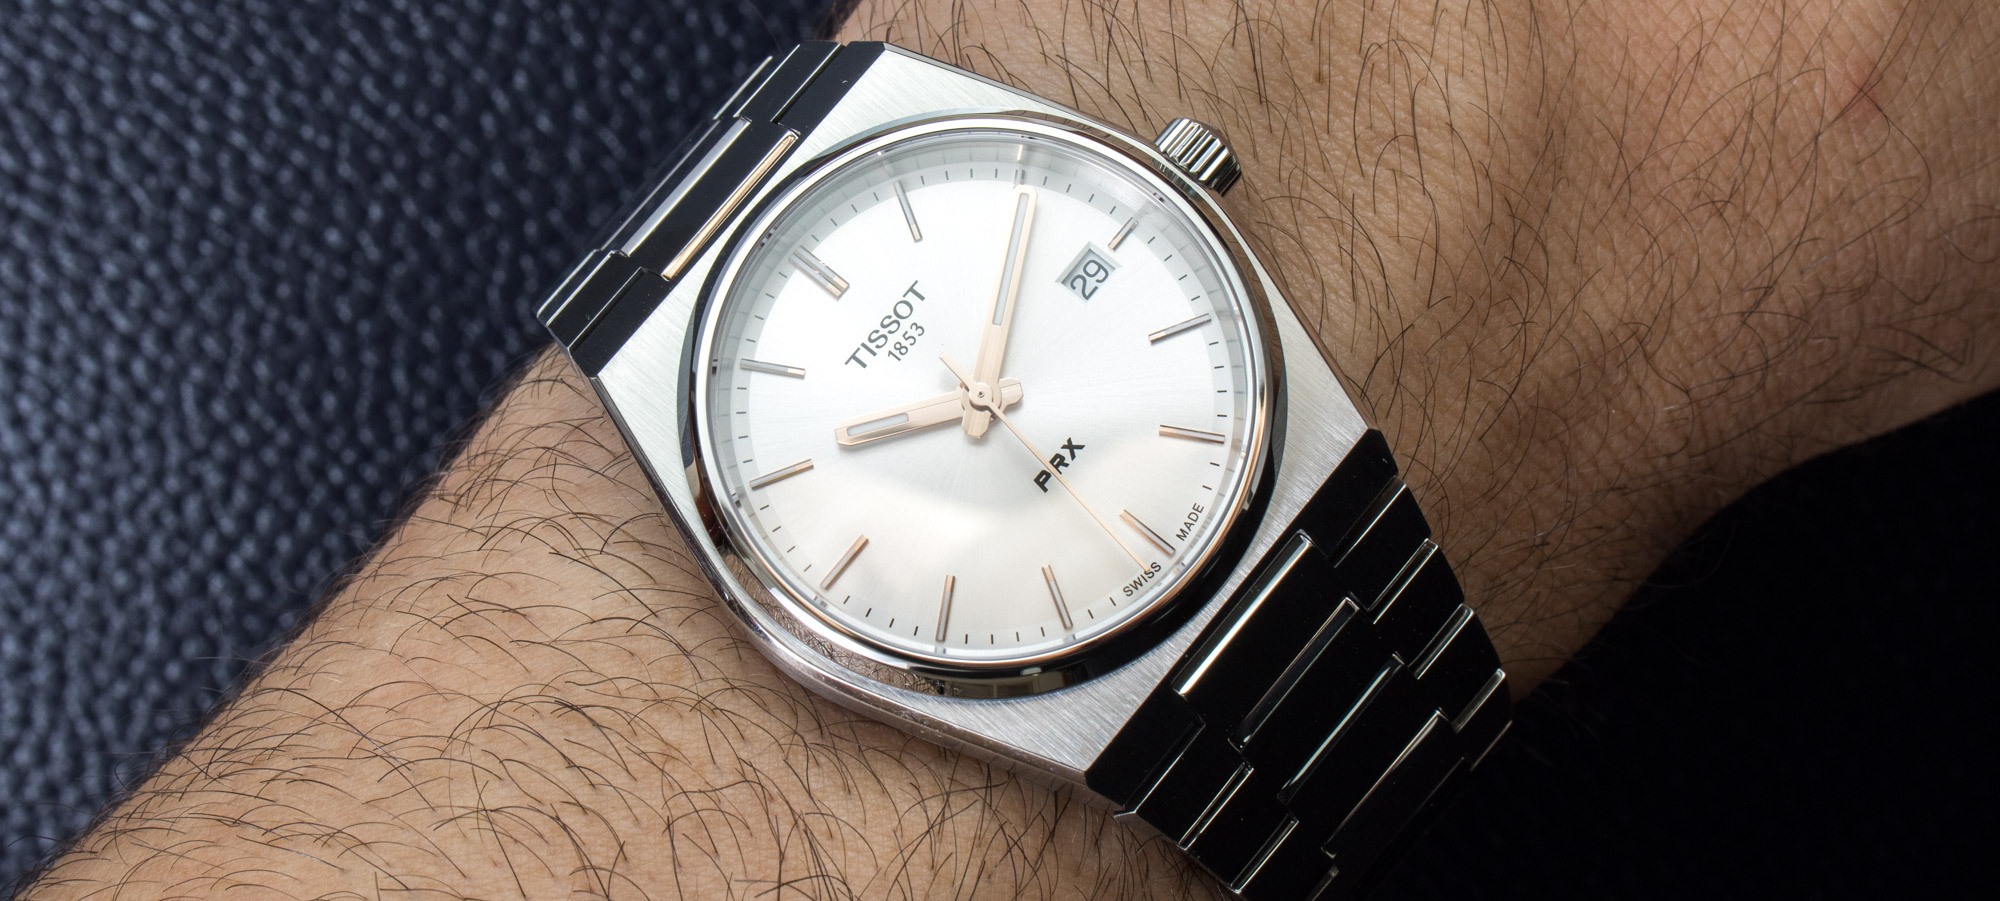 Hands-On: The Highly Requested Tissot PRX 35mm Watch | aBlogtoWatch